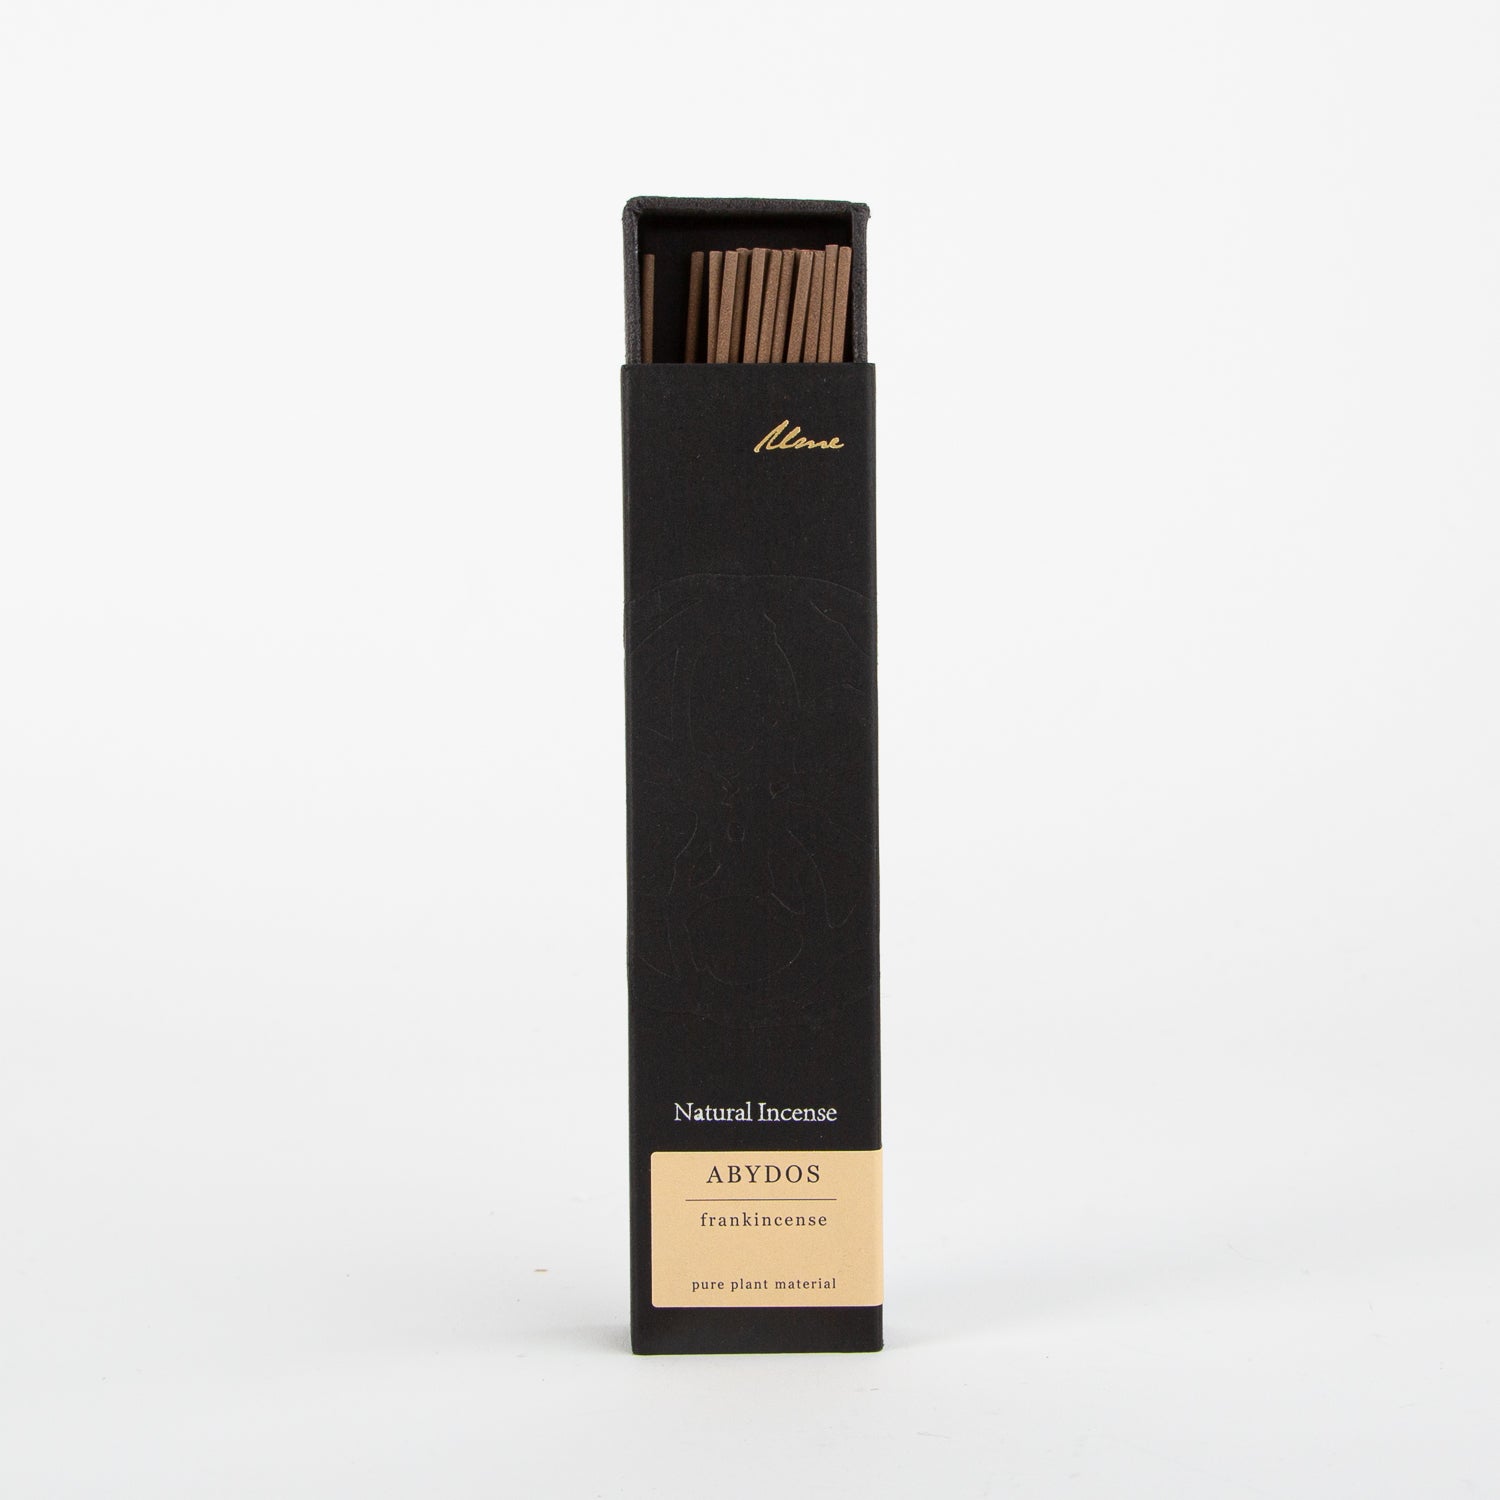 abydos natural incense sticks by Ume collection at Secret Location